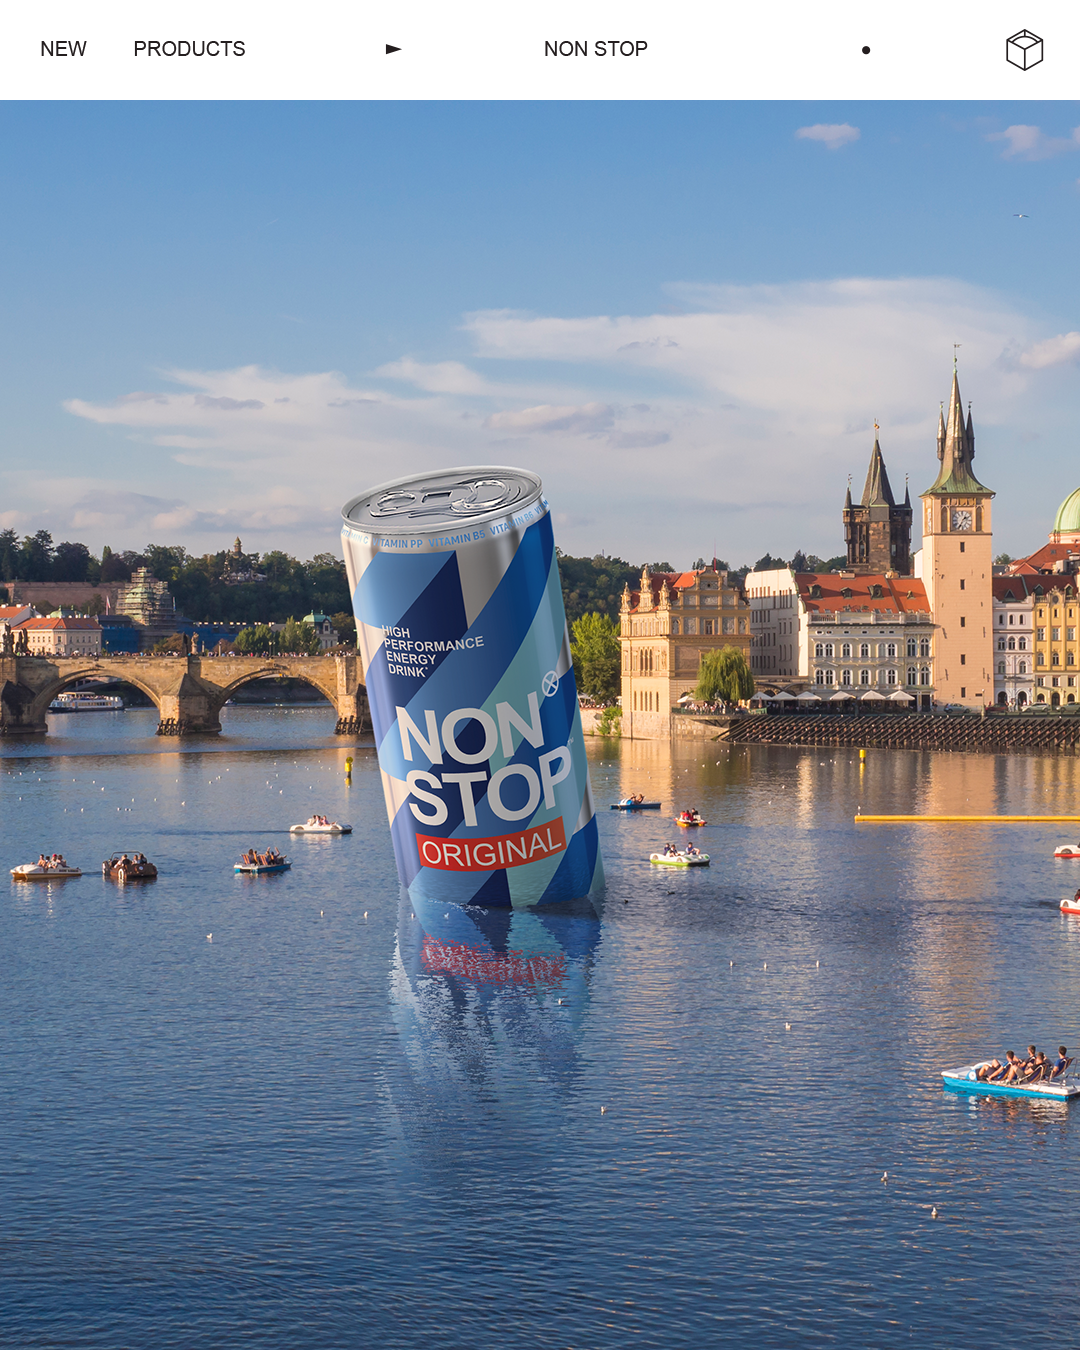 NON STOP Available Now at Pedalos Rental Station in the Heart of Prague